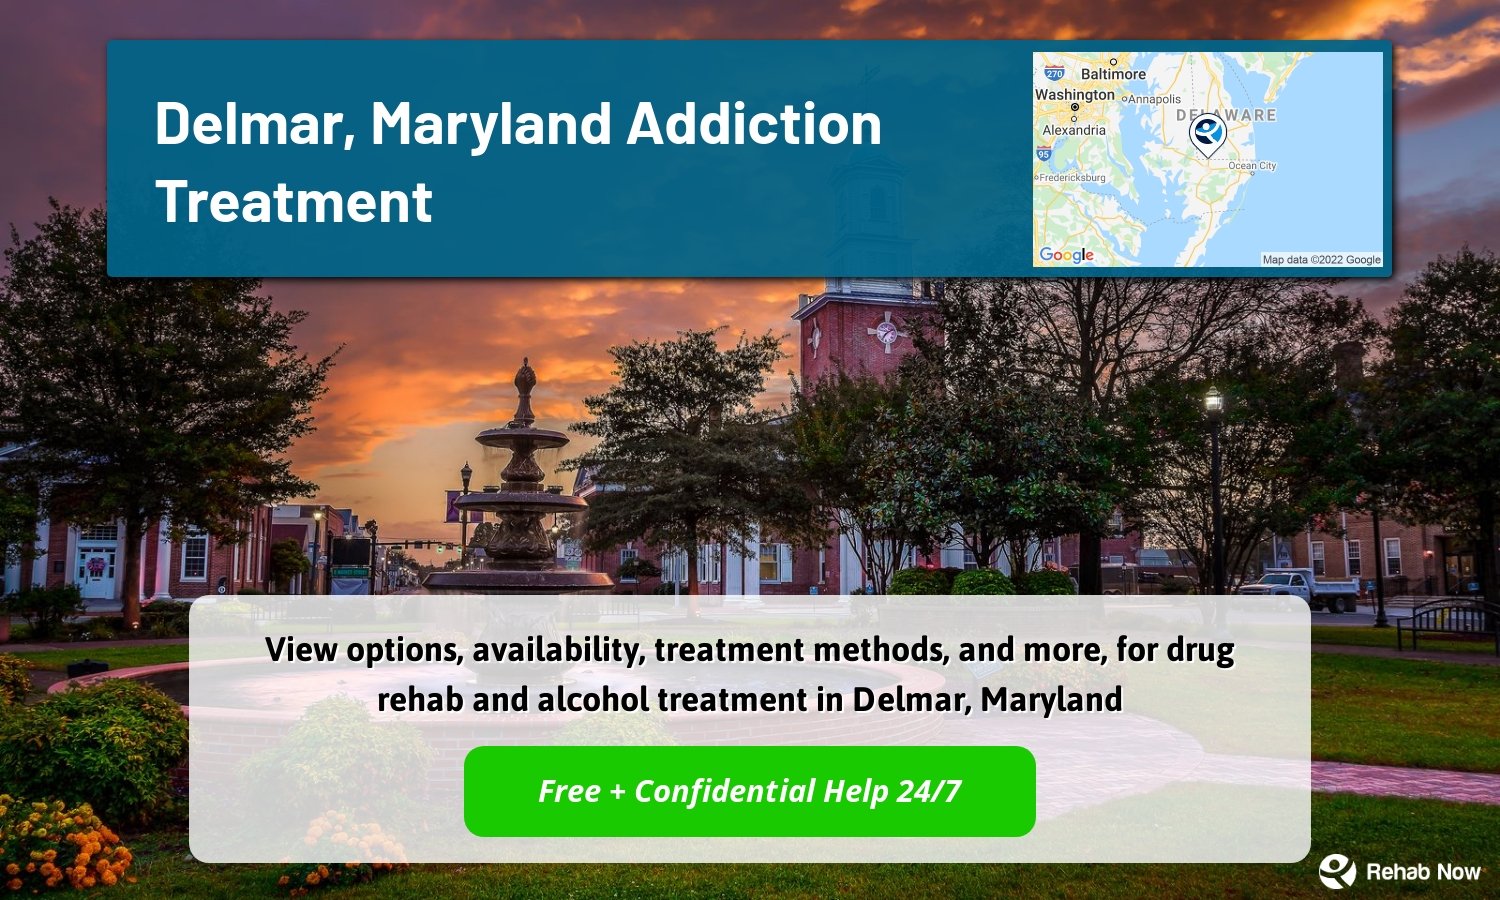 View options, availability, treatment methods, and more, for drug rehab and alcohol treatment in Delmar, Maryland